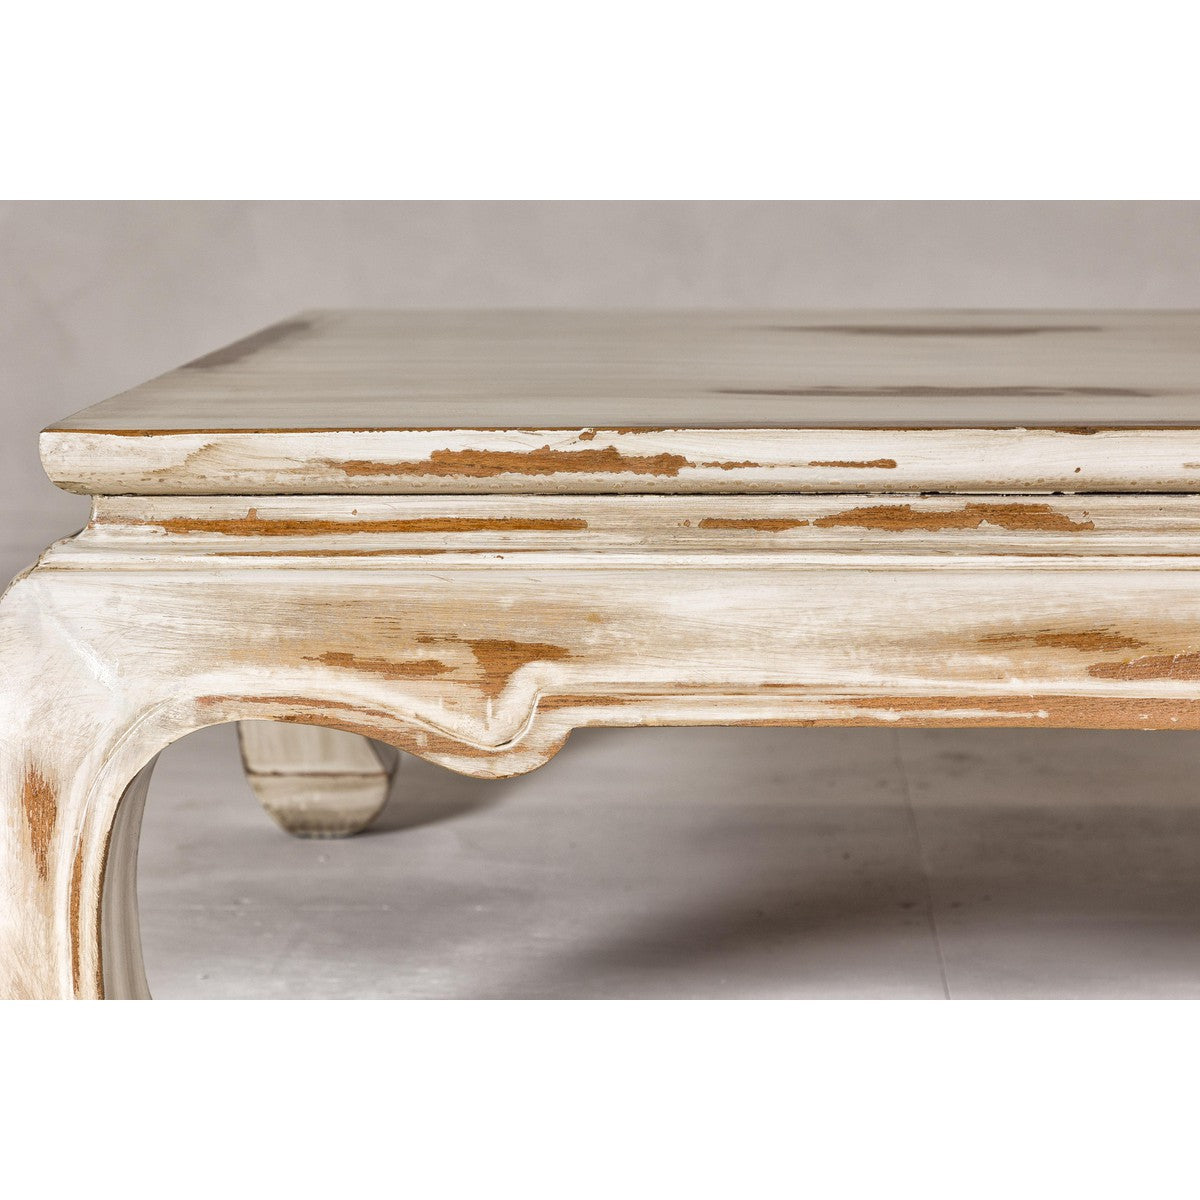 Distressed White Coffee Table with Chow Legs and Square Top, Vintage-YN7957-6. Asian & Chinese Furniture, Art, Antiques, Vintage Home Décor for sale at FEA Home